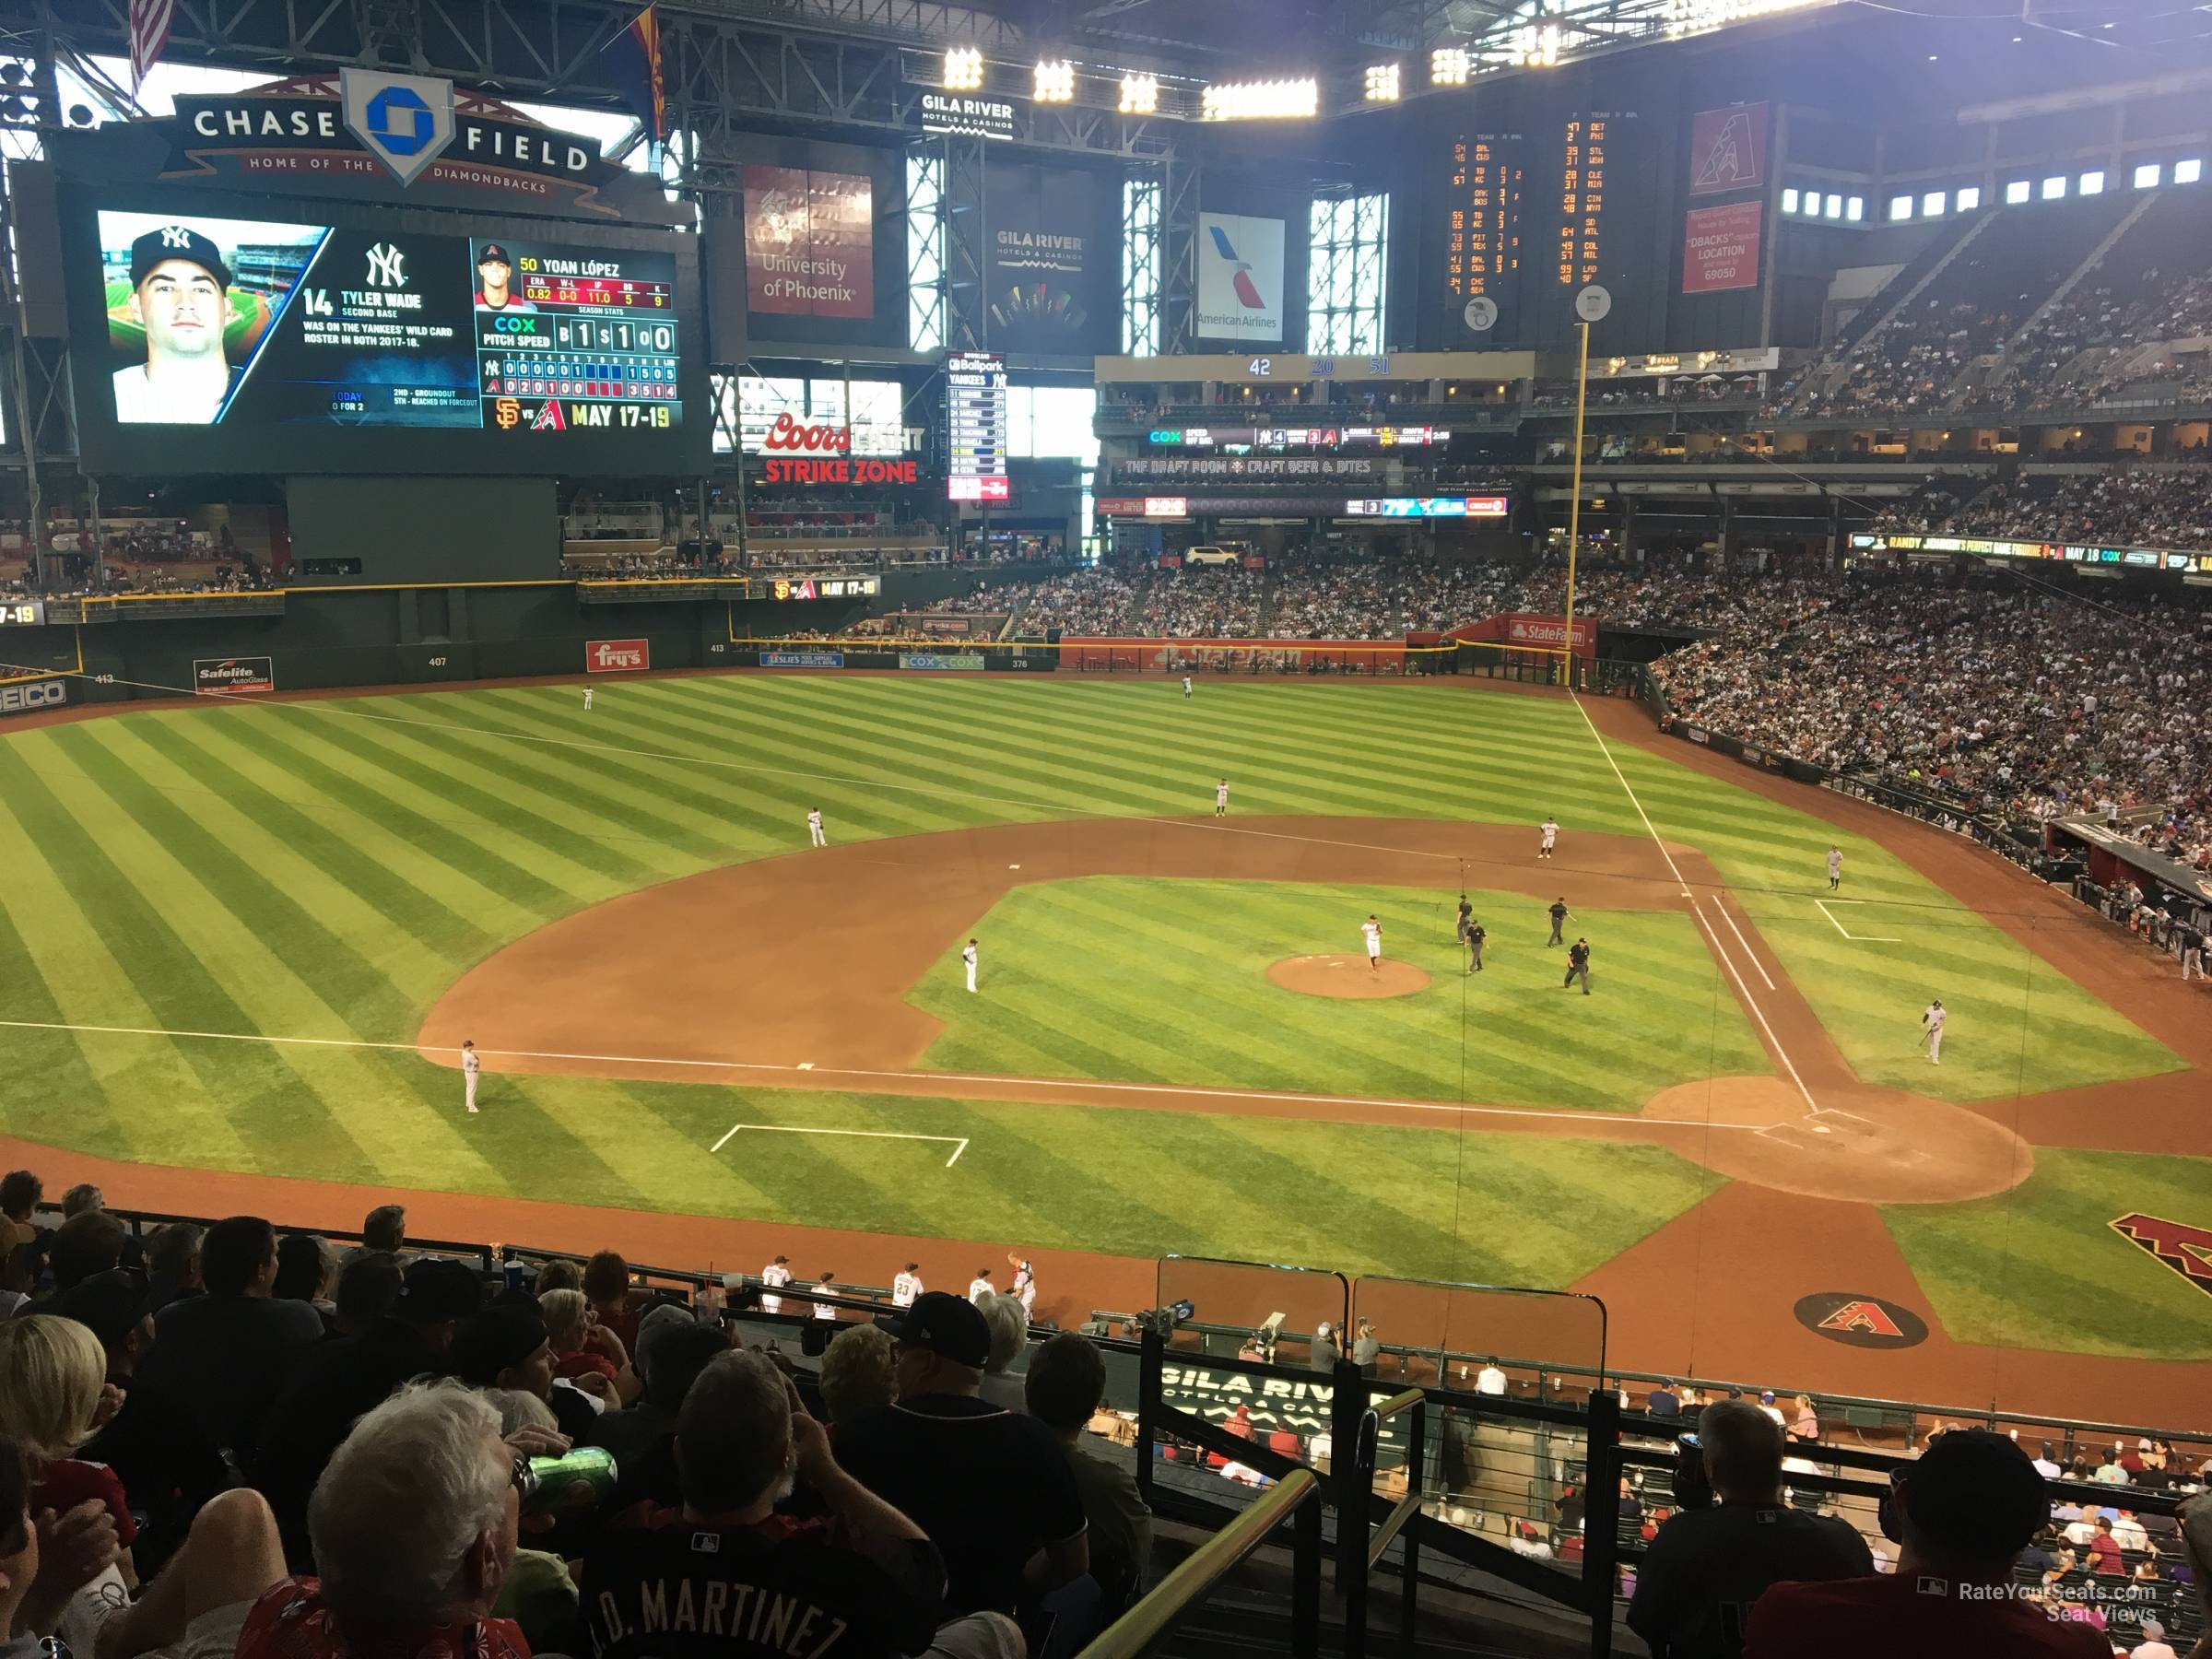 section 210i, row 2 seat view  for baseball - chase field